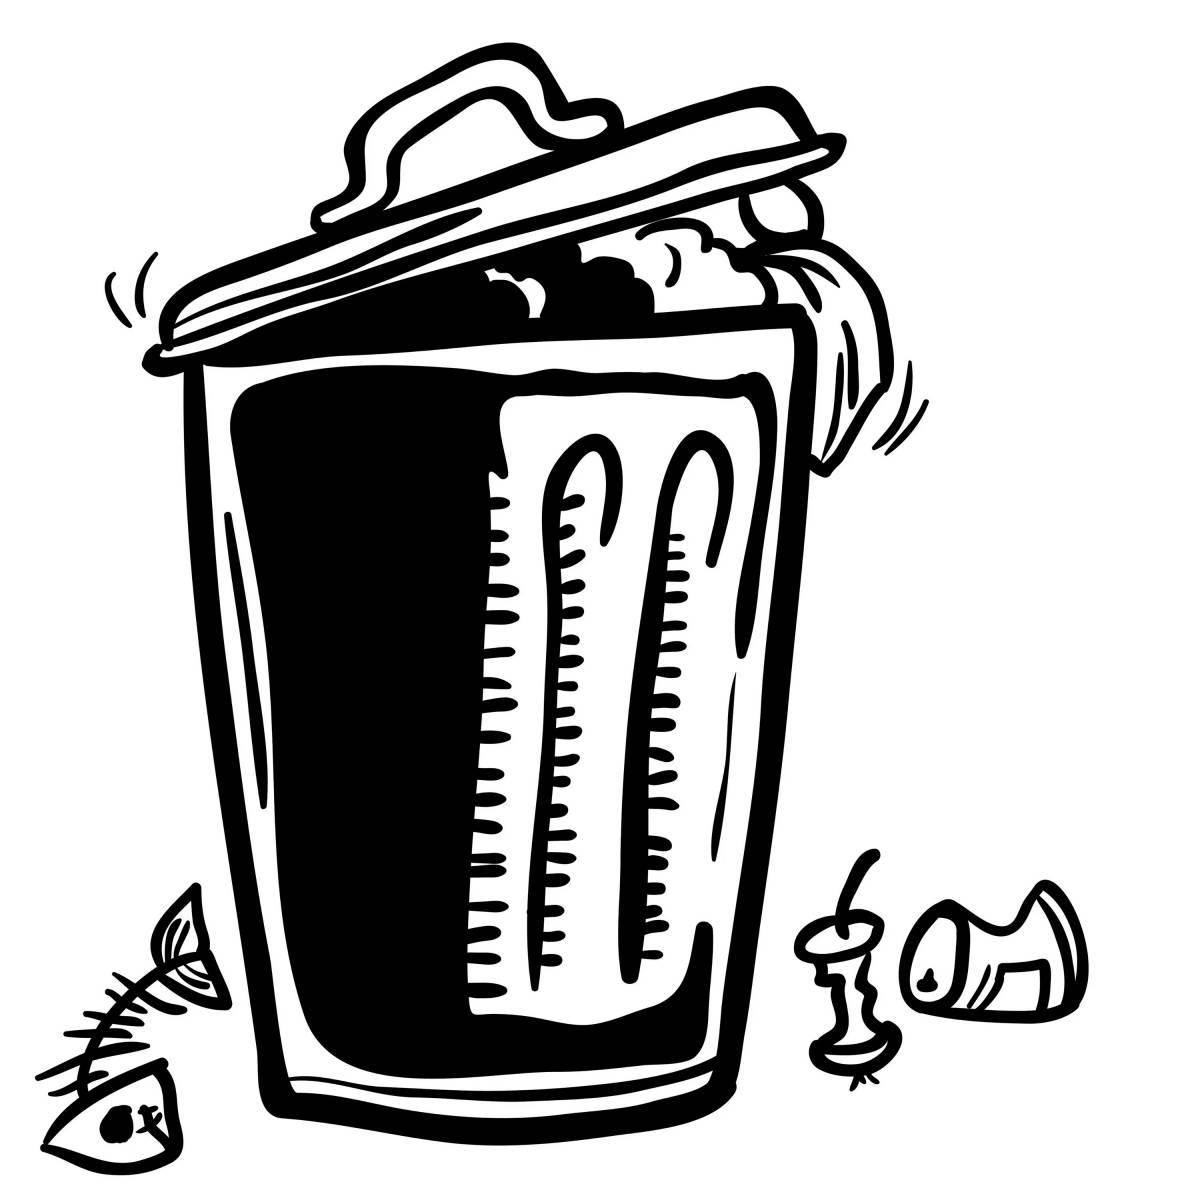 Glittering trash can coloring page